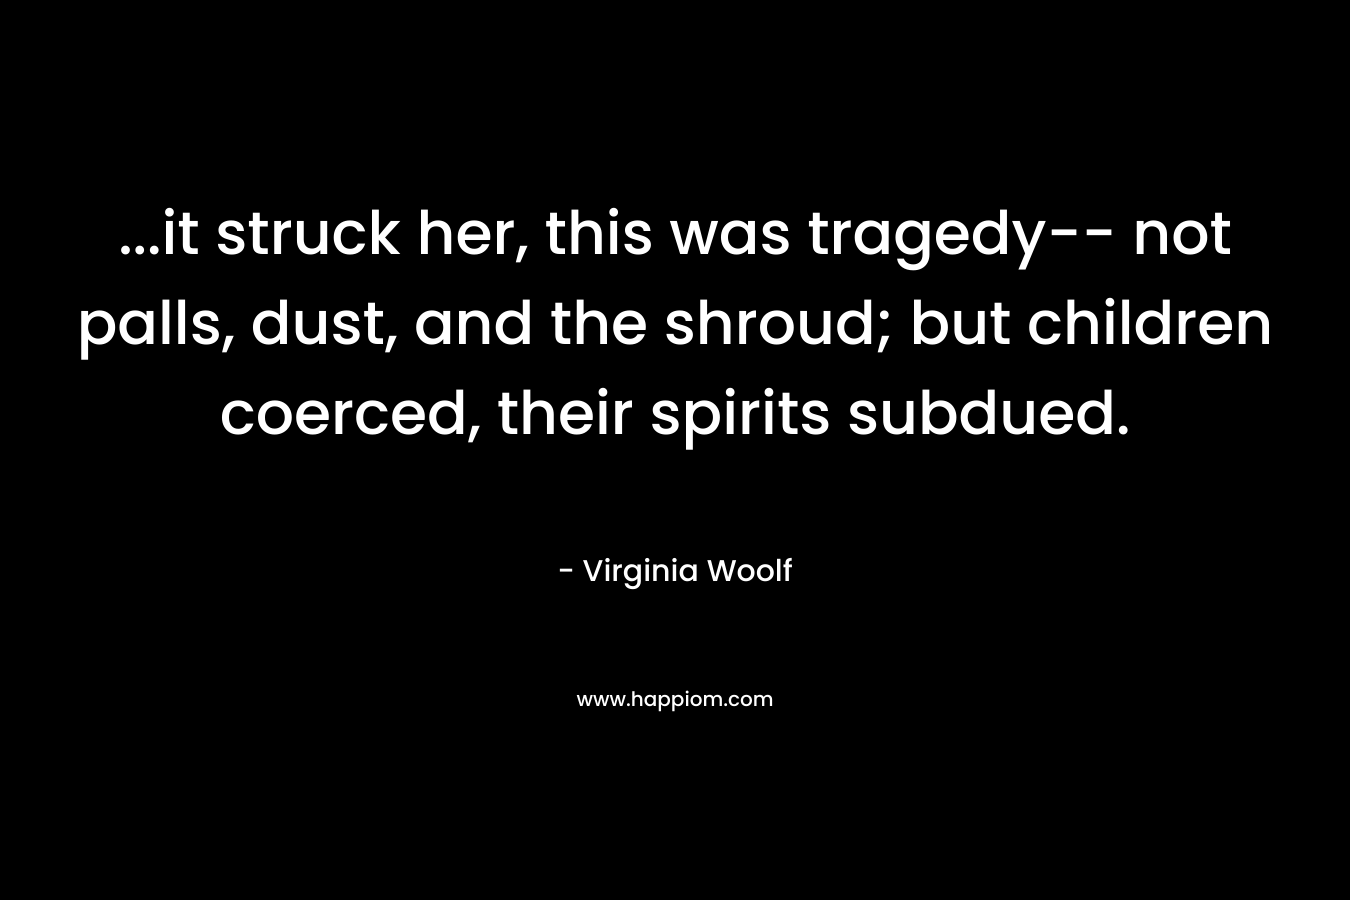 ...it struck her, this was tragedy-- not palls, dust, and the shroud; but children coerced, their spirits subdued.